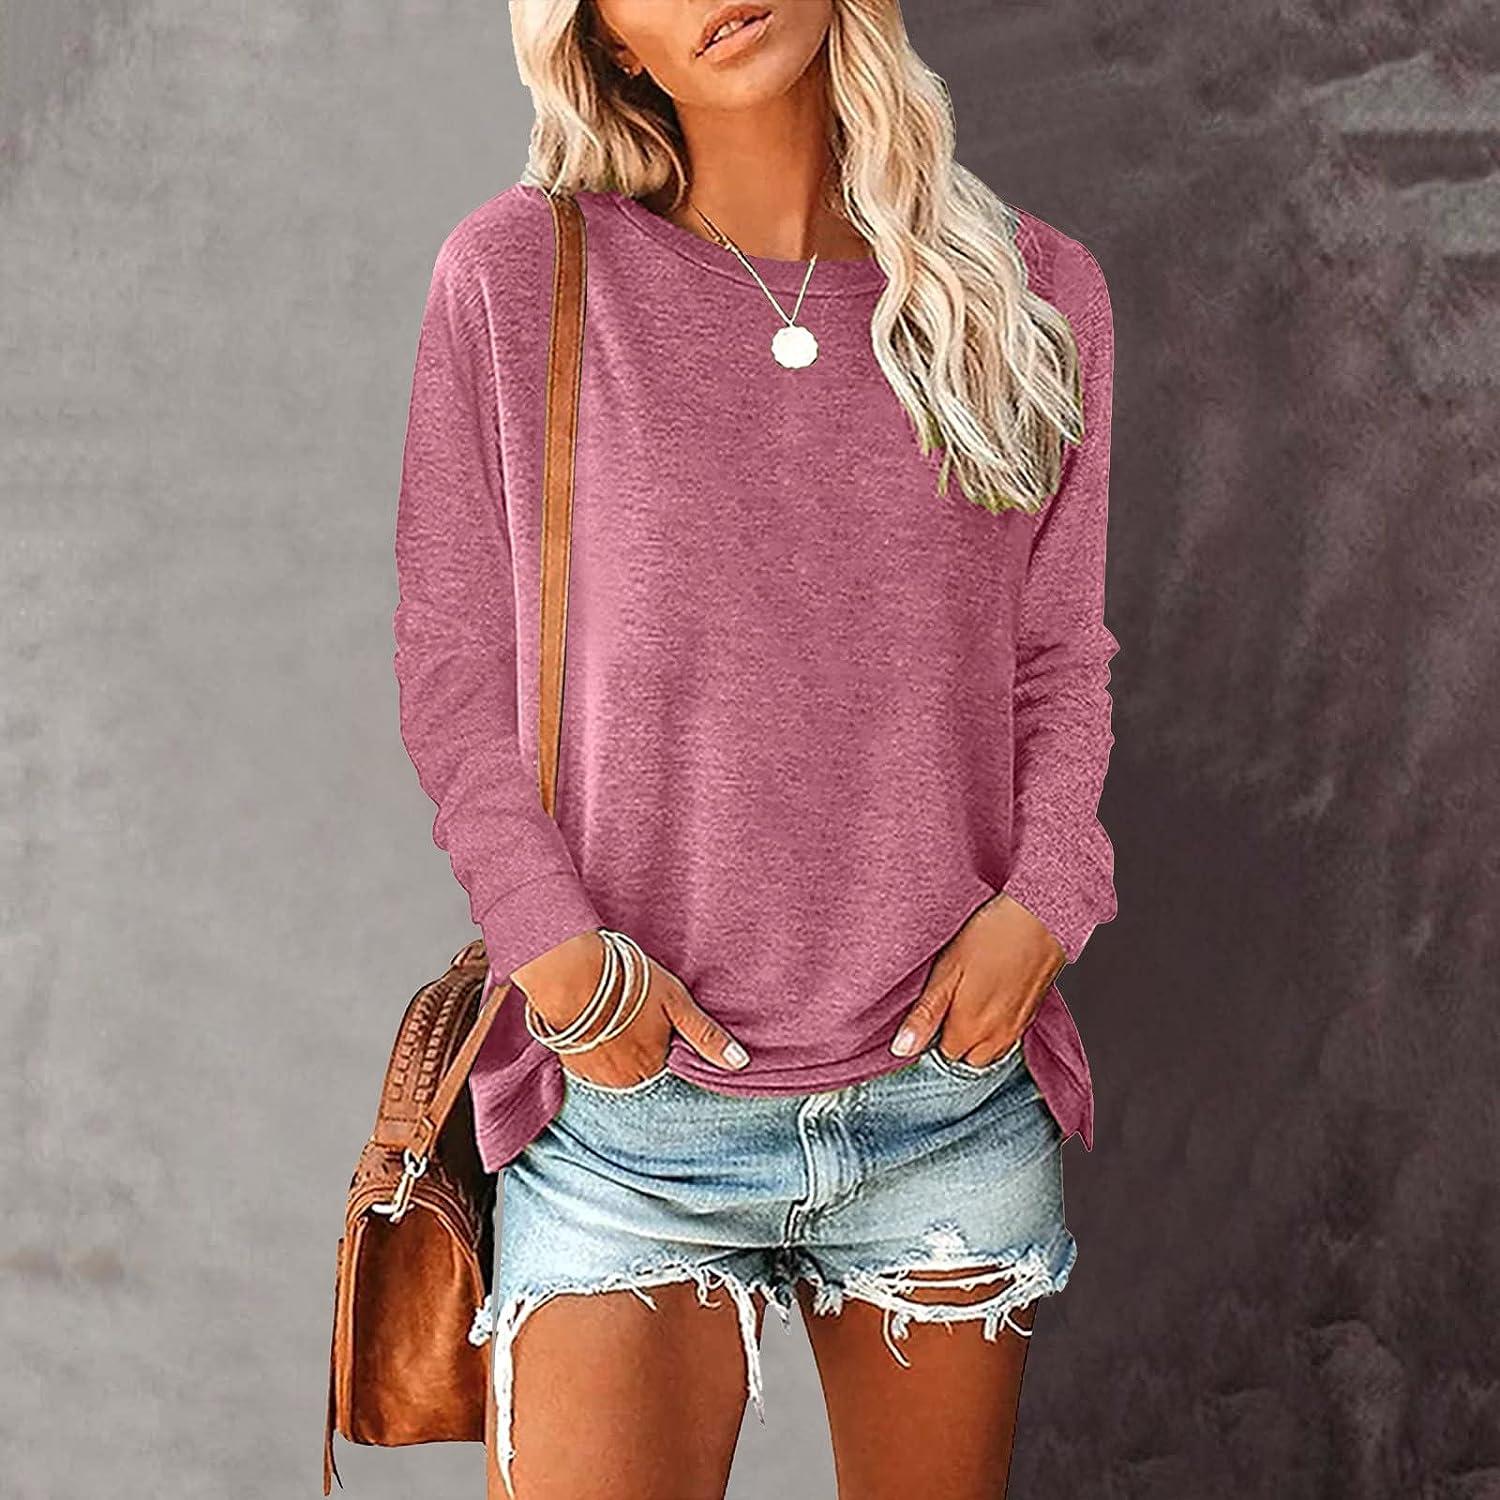 Fashion Ladies Casual Tops T-Shirt Women Summer Loose Top Long Sleeve Blouse